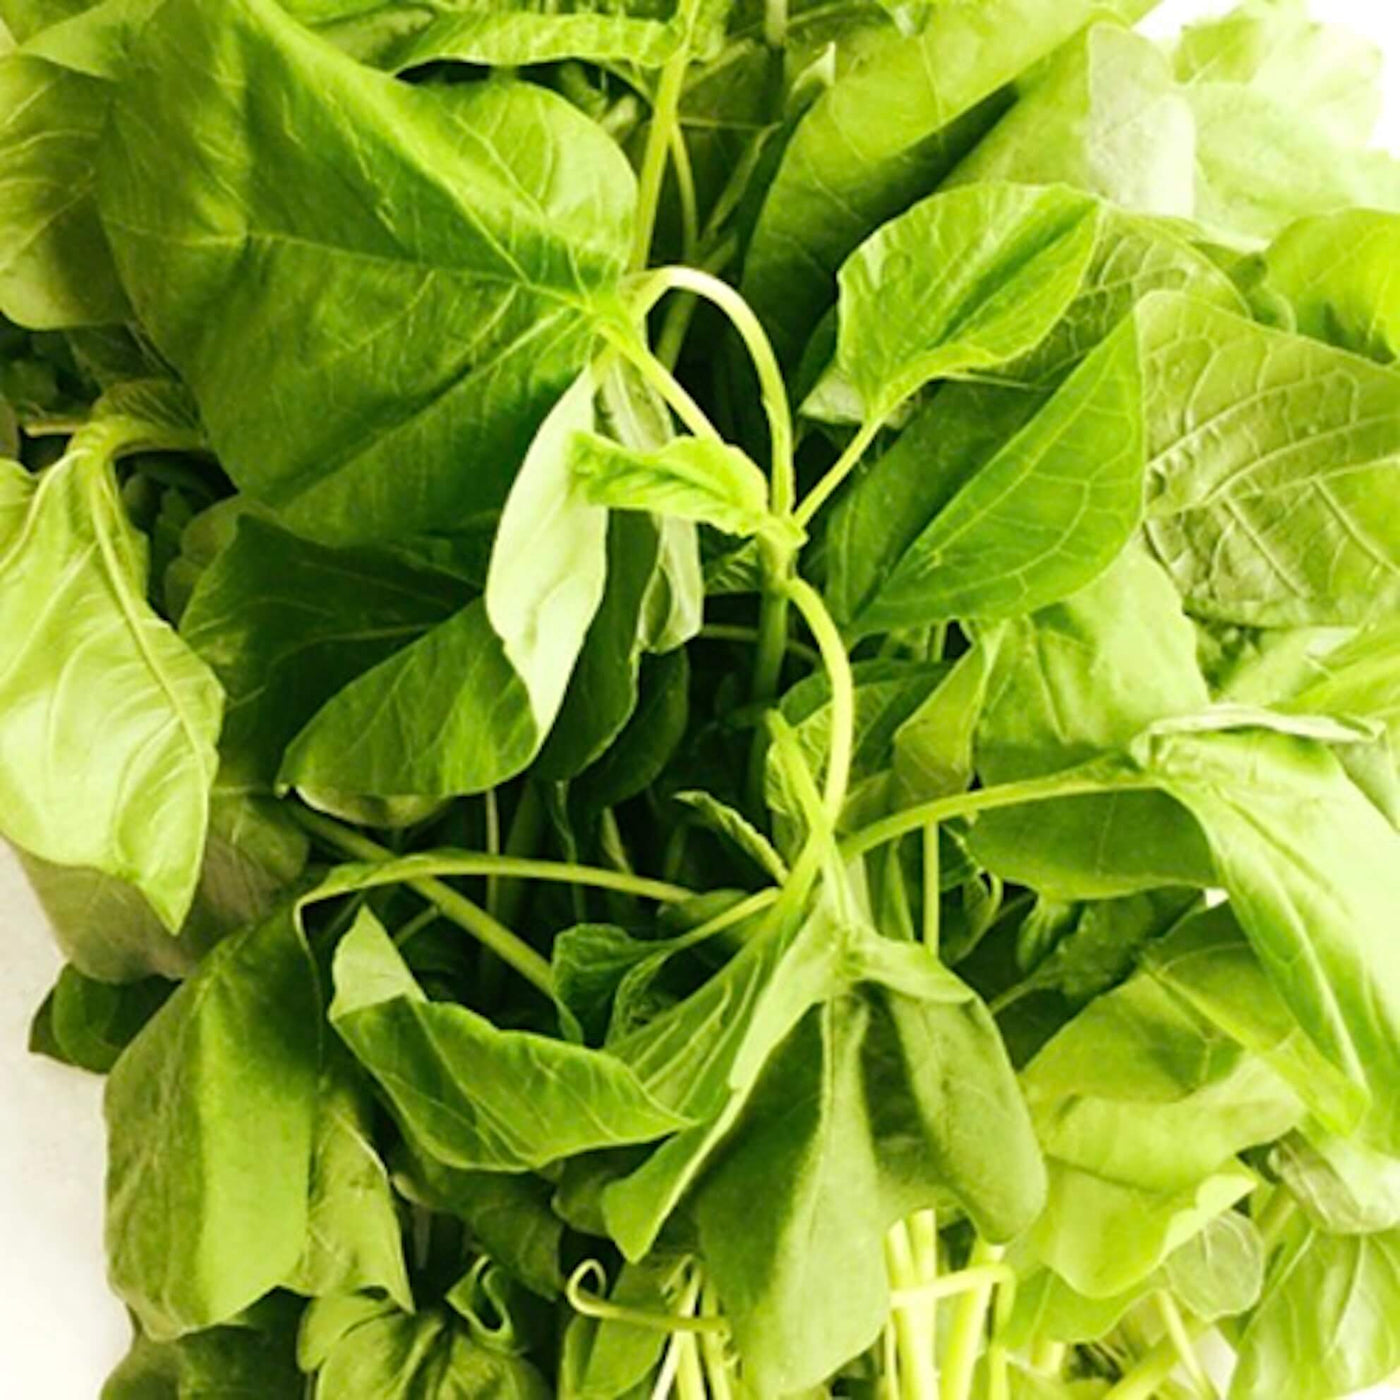 local-spinach-heng-cai-online-grocery-delivery-singapore-supermarket-thenewgrocer